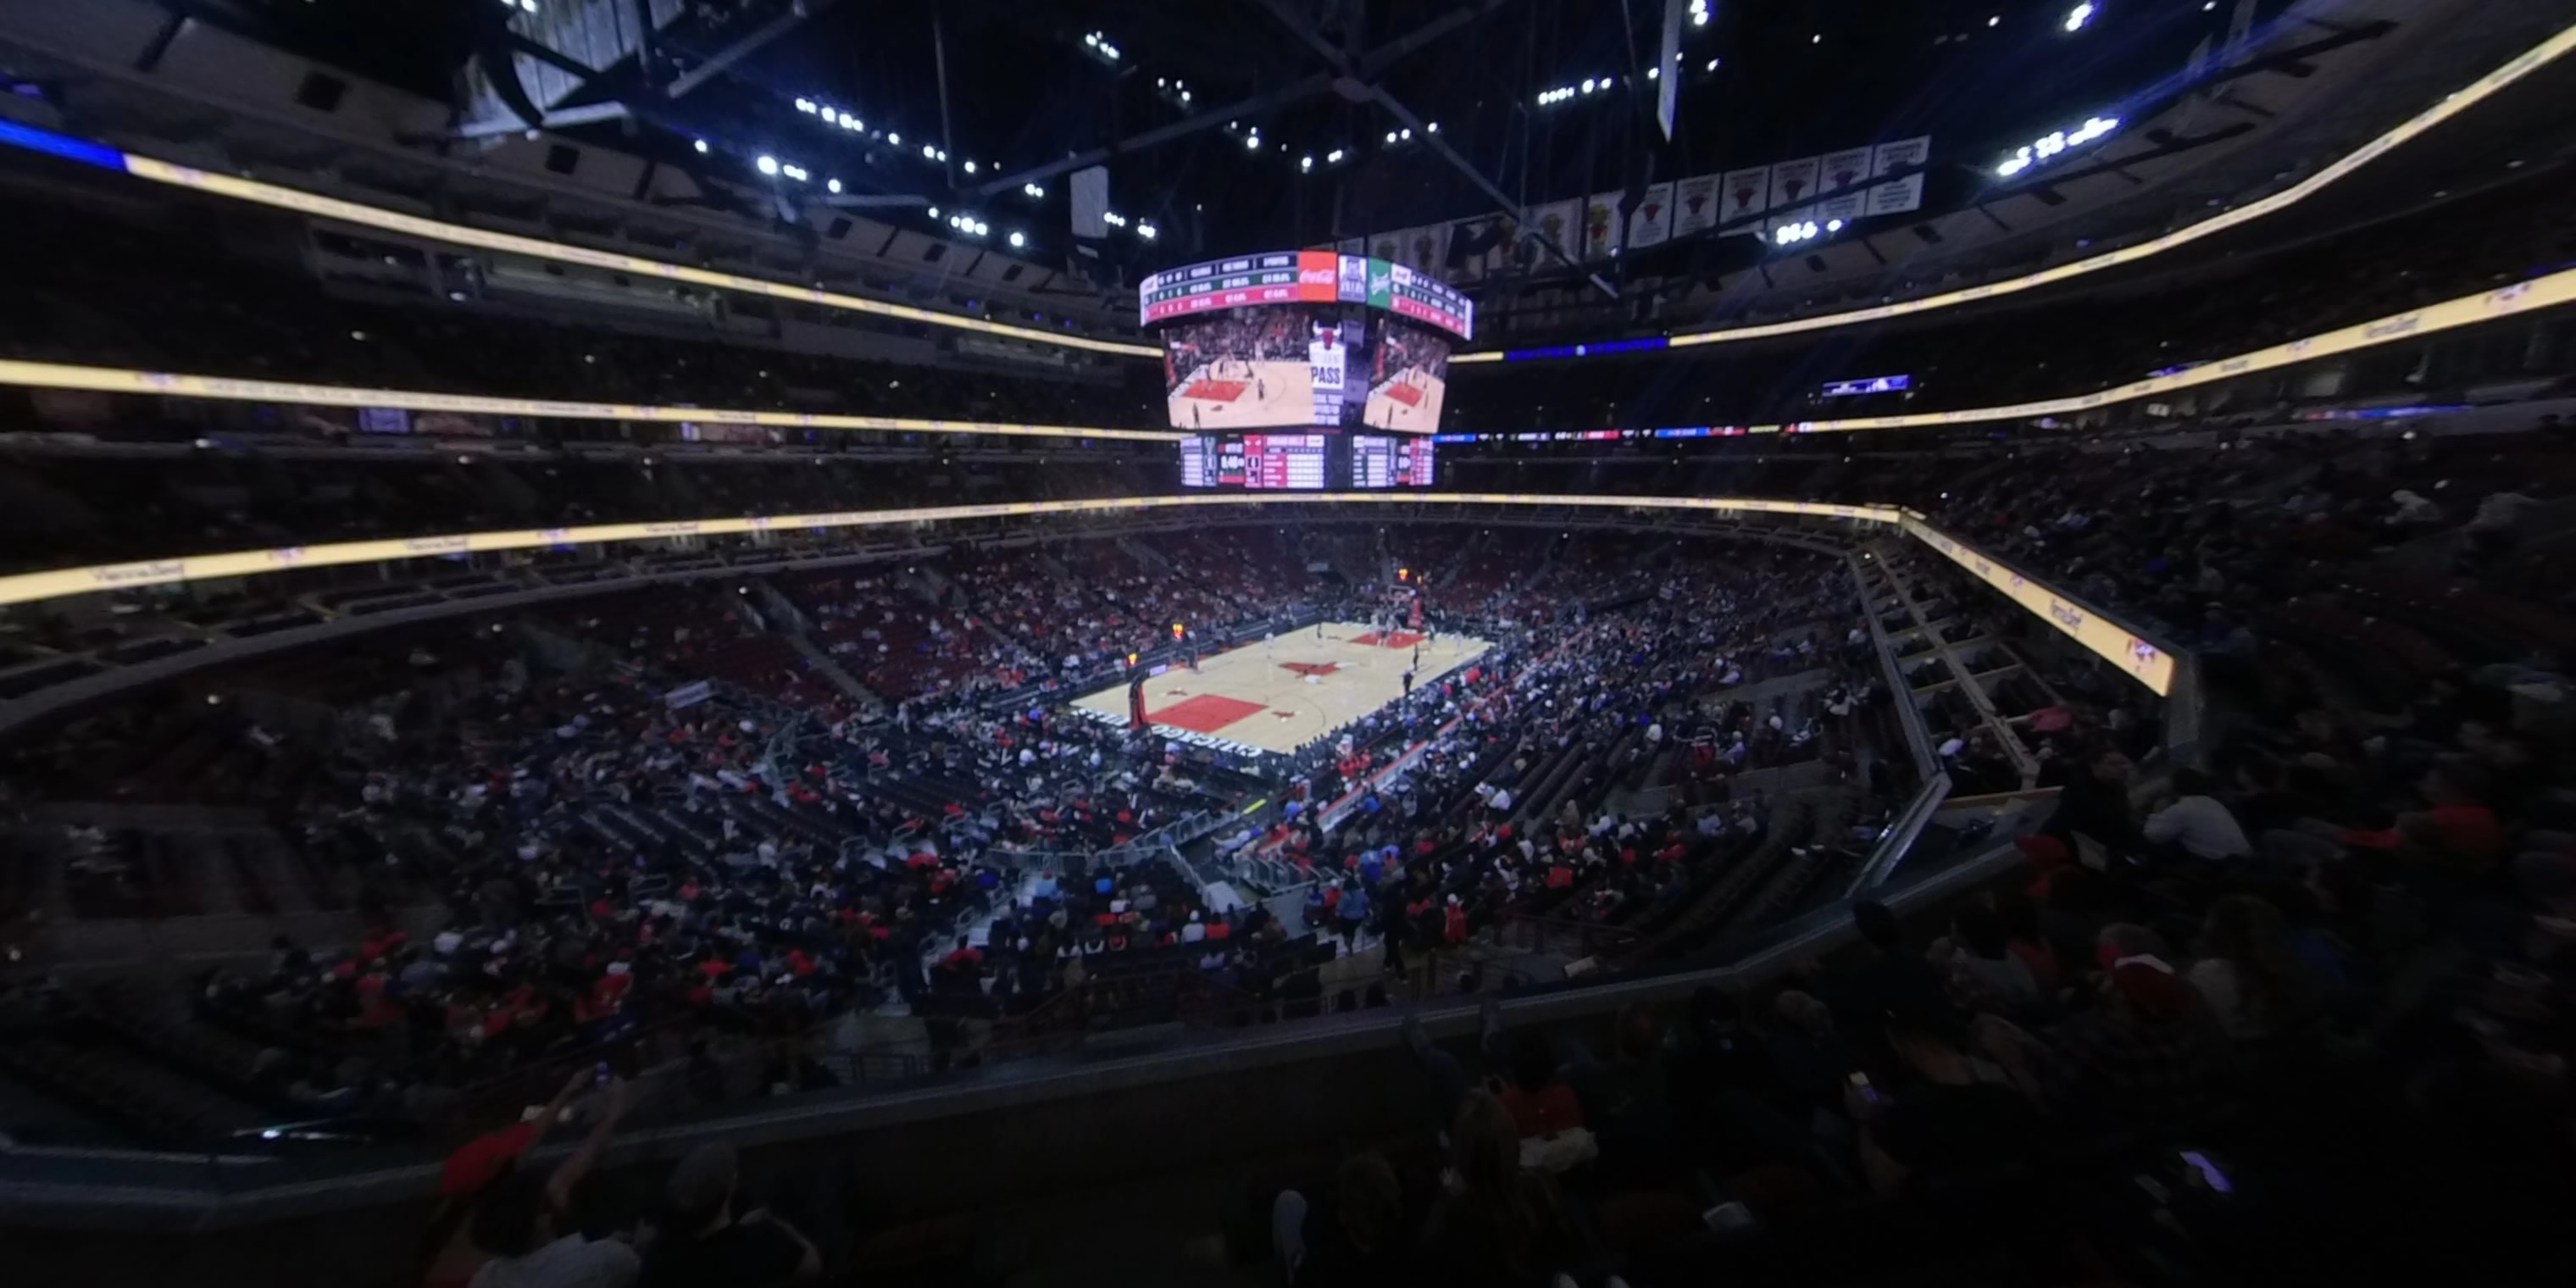 section 205 panoramic seat view  for basketball - united center